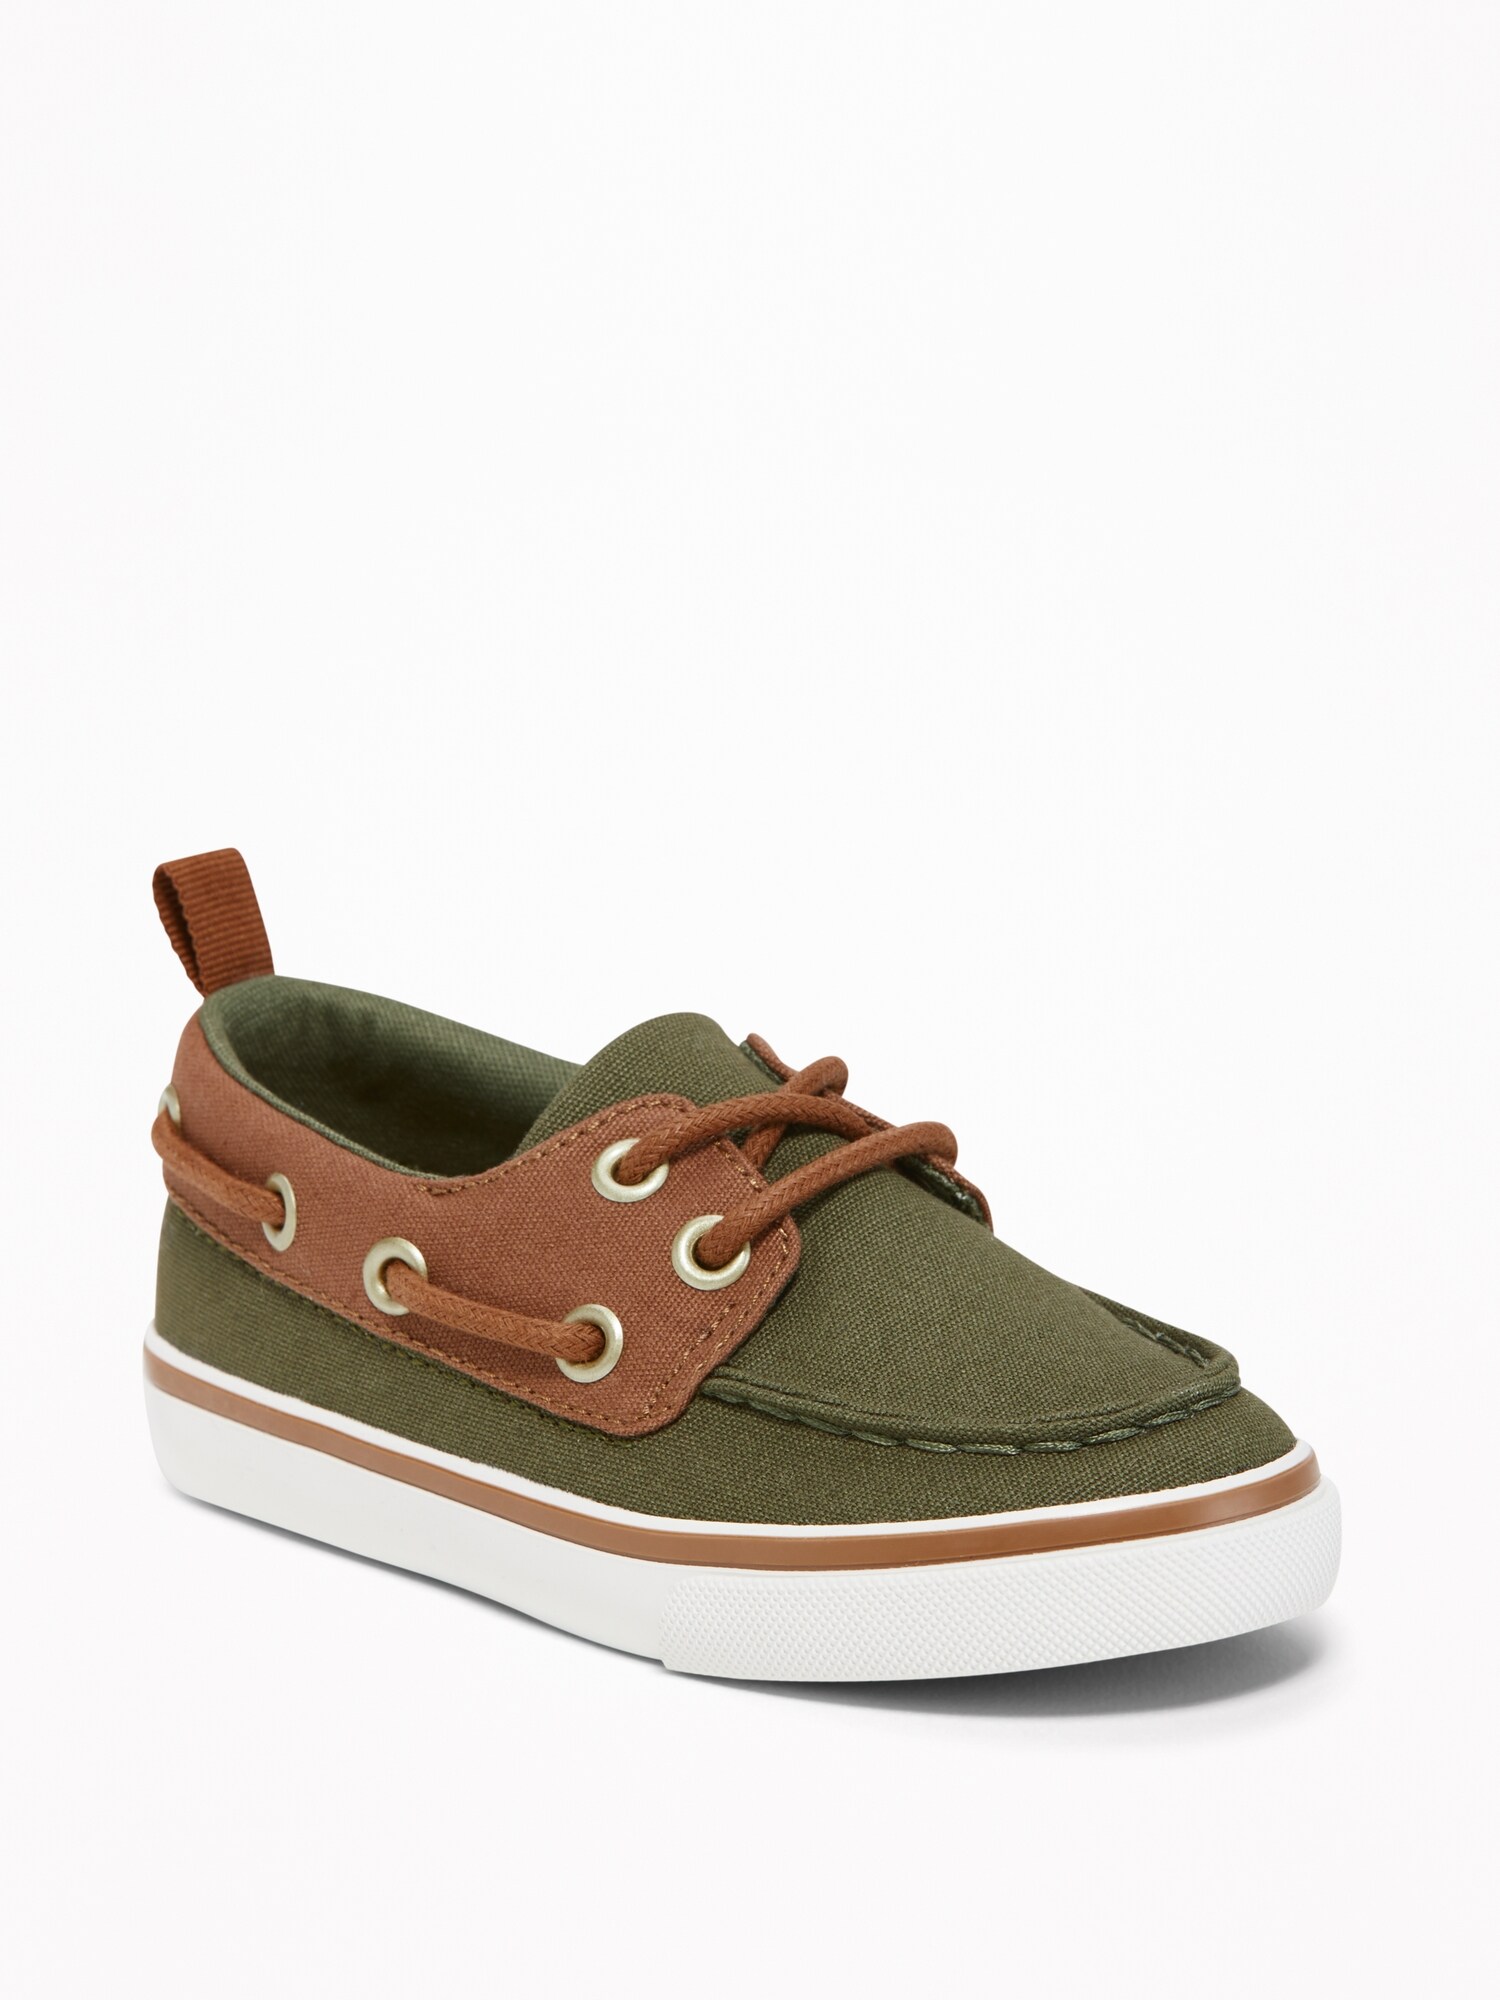 Chambray Boat Shoes for Toddler Boys